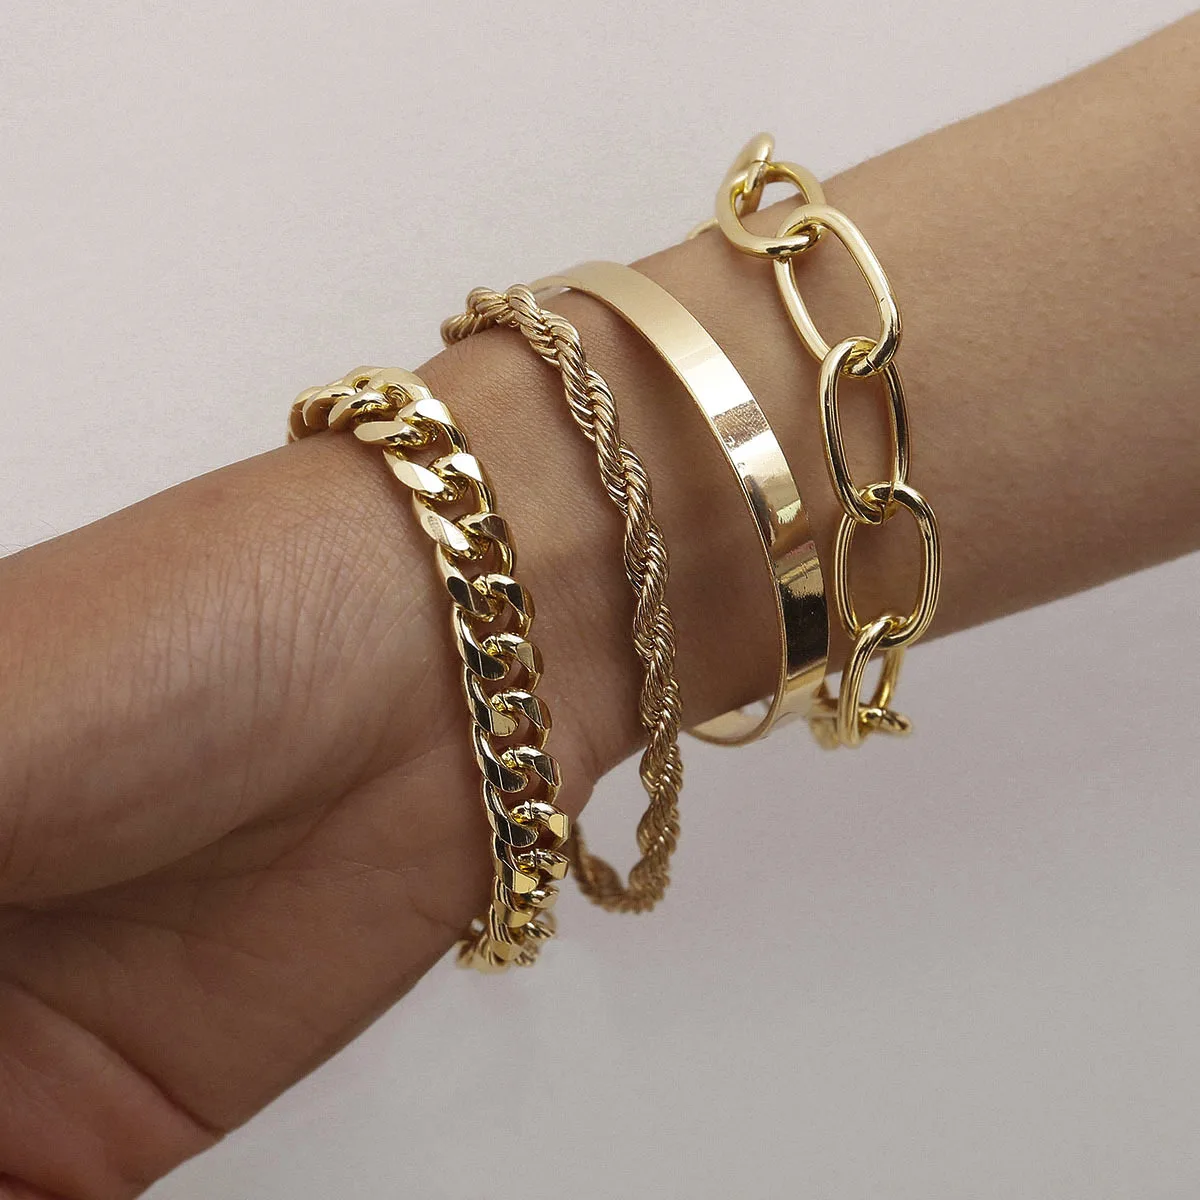 

VRIUA New Multilayer Personality Exaggerated Bracelet Set Geometric Metal Thick Chain Couple Bracelet Jewelry Accessories, Gold/silver